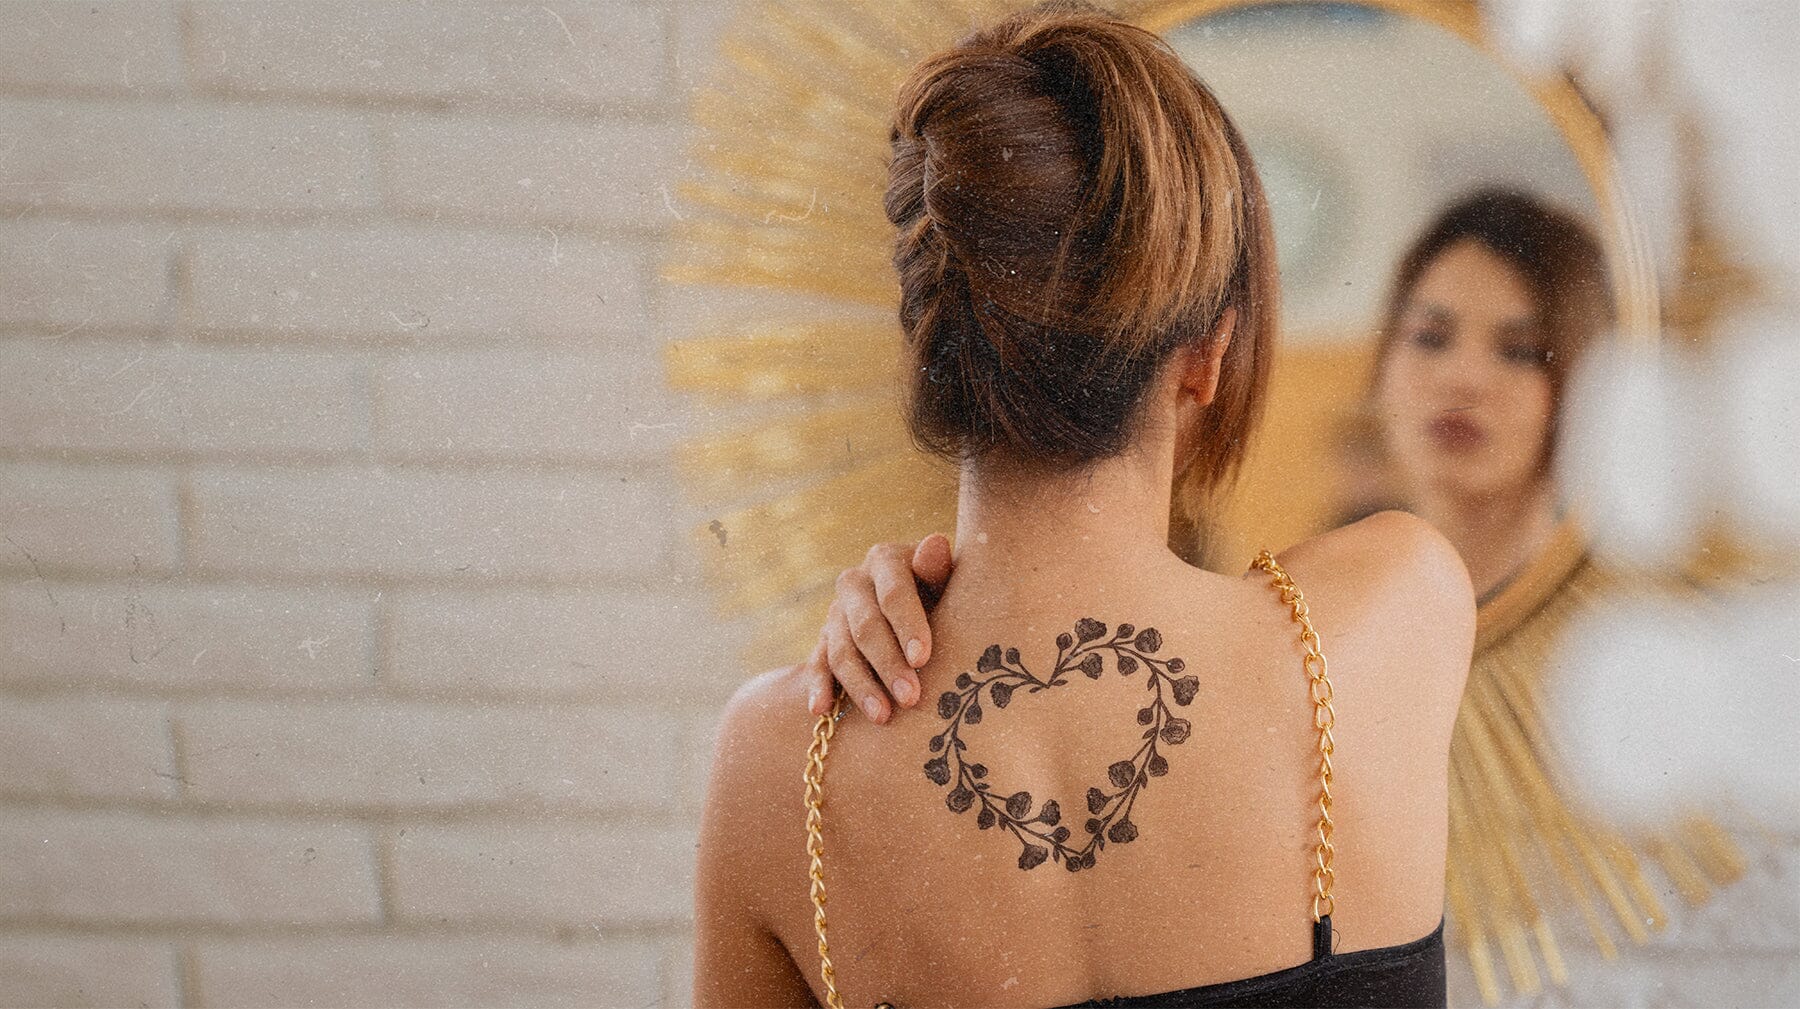 The Western-Inspired Tattoo Trend Has Officially Arrived (& It's Giving  Coastal Cowgirl)